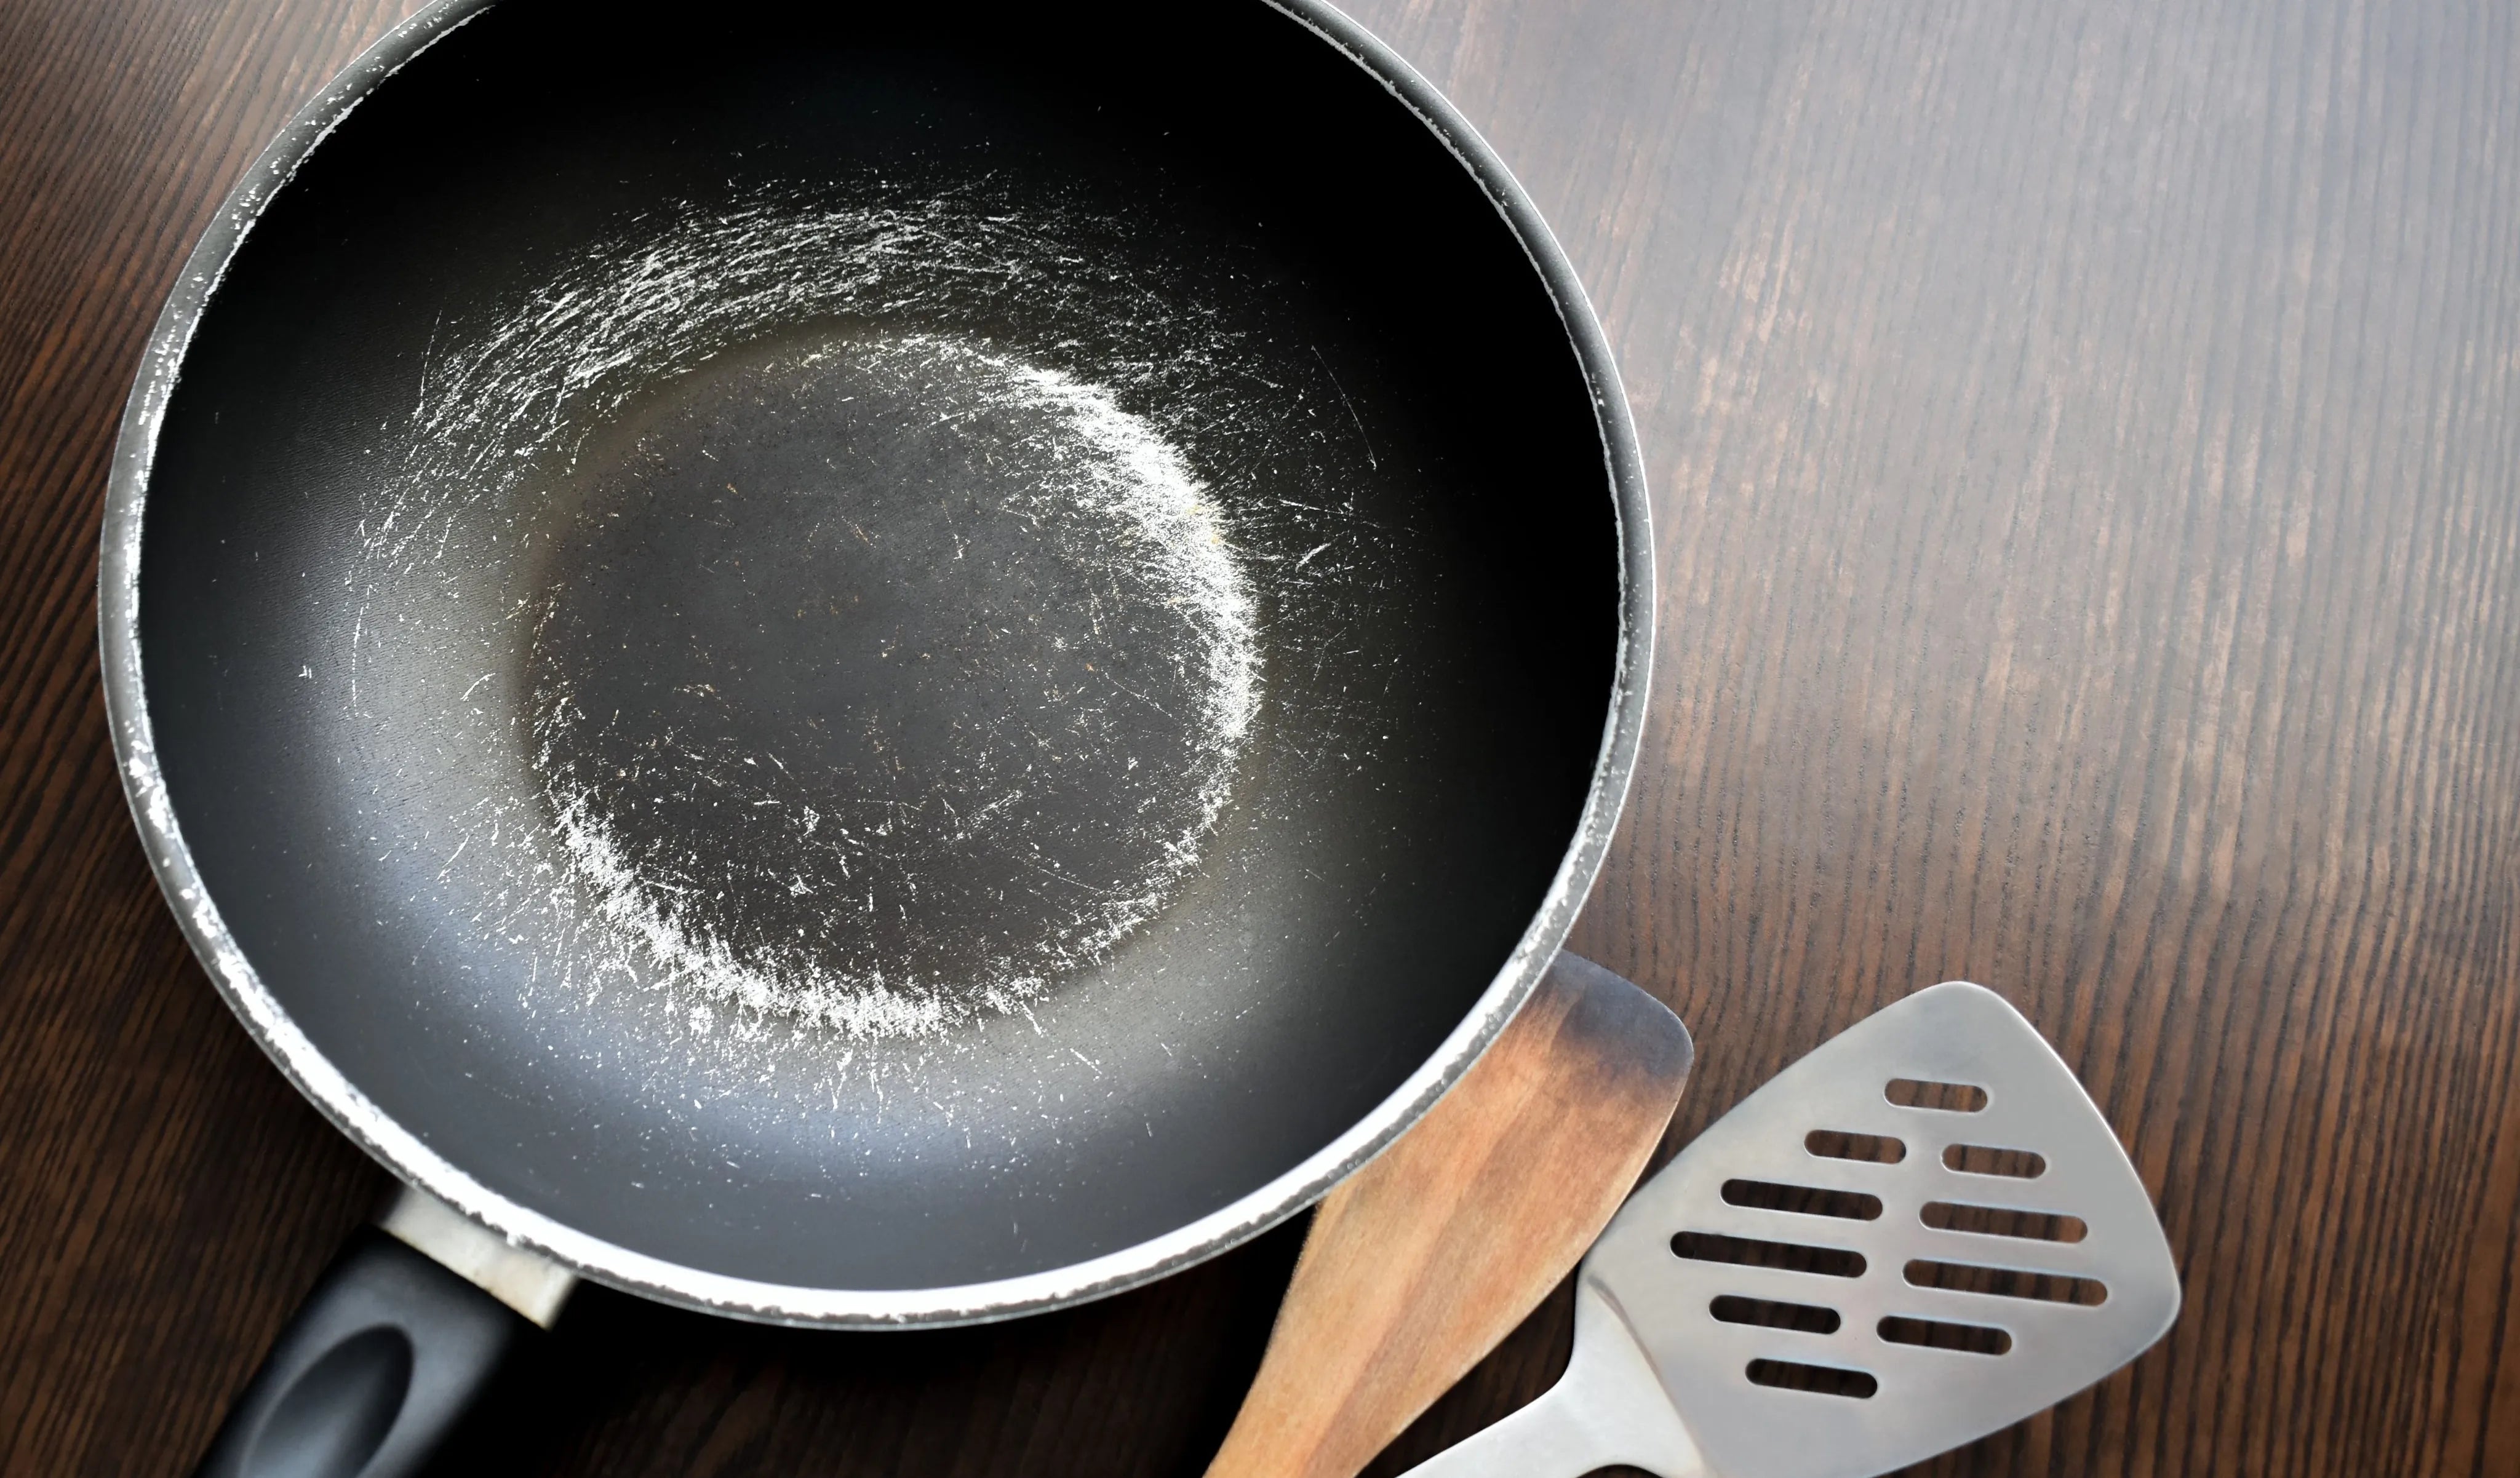 Blog - PFAS-Free Cooking Guide - How to Cook Non-stick with